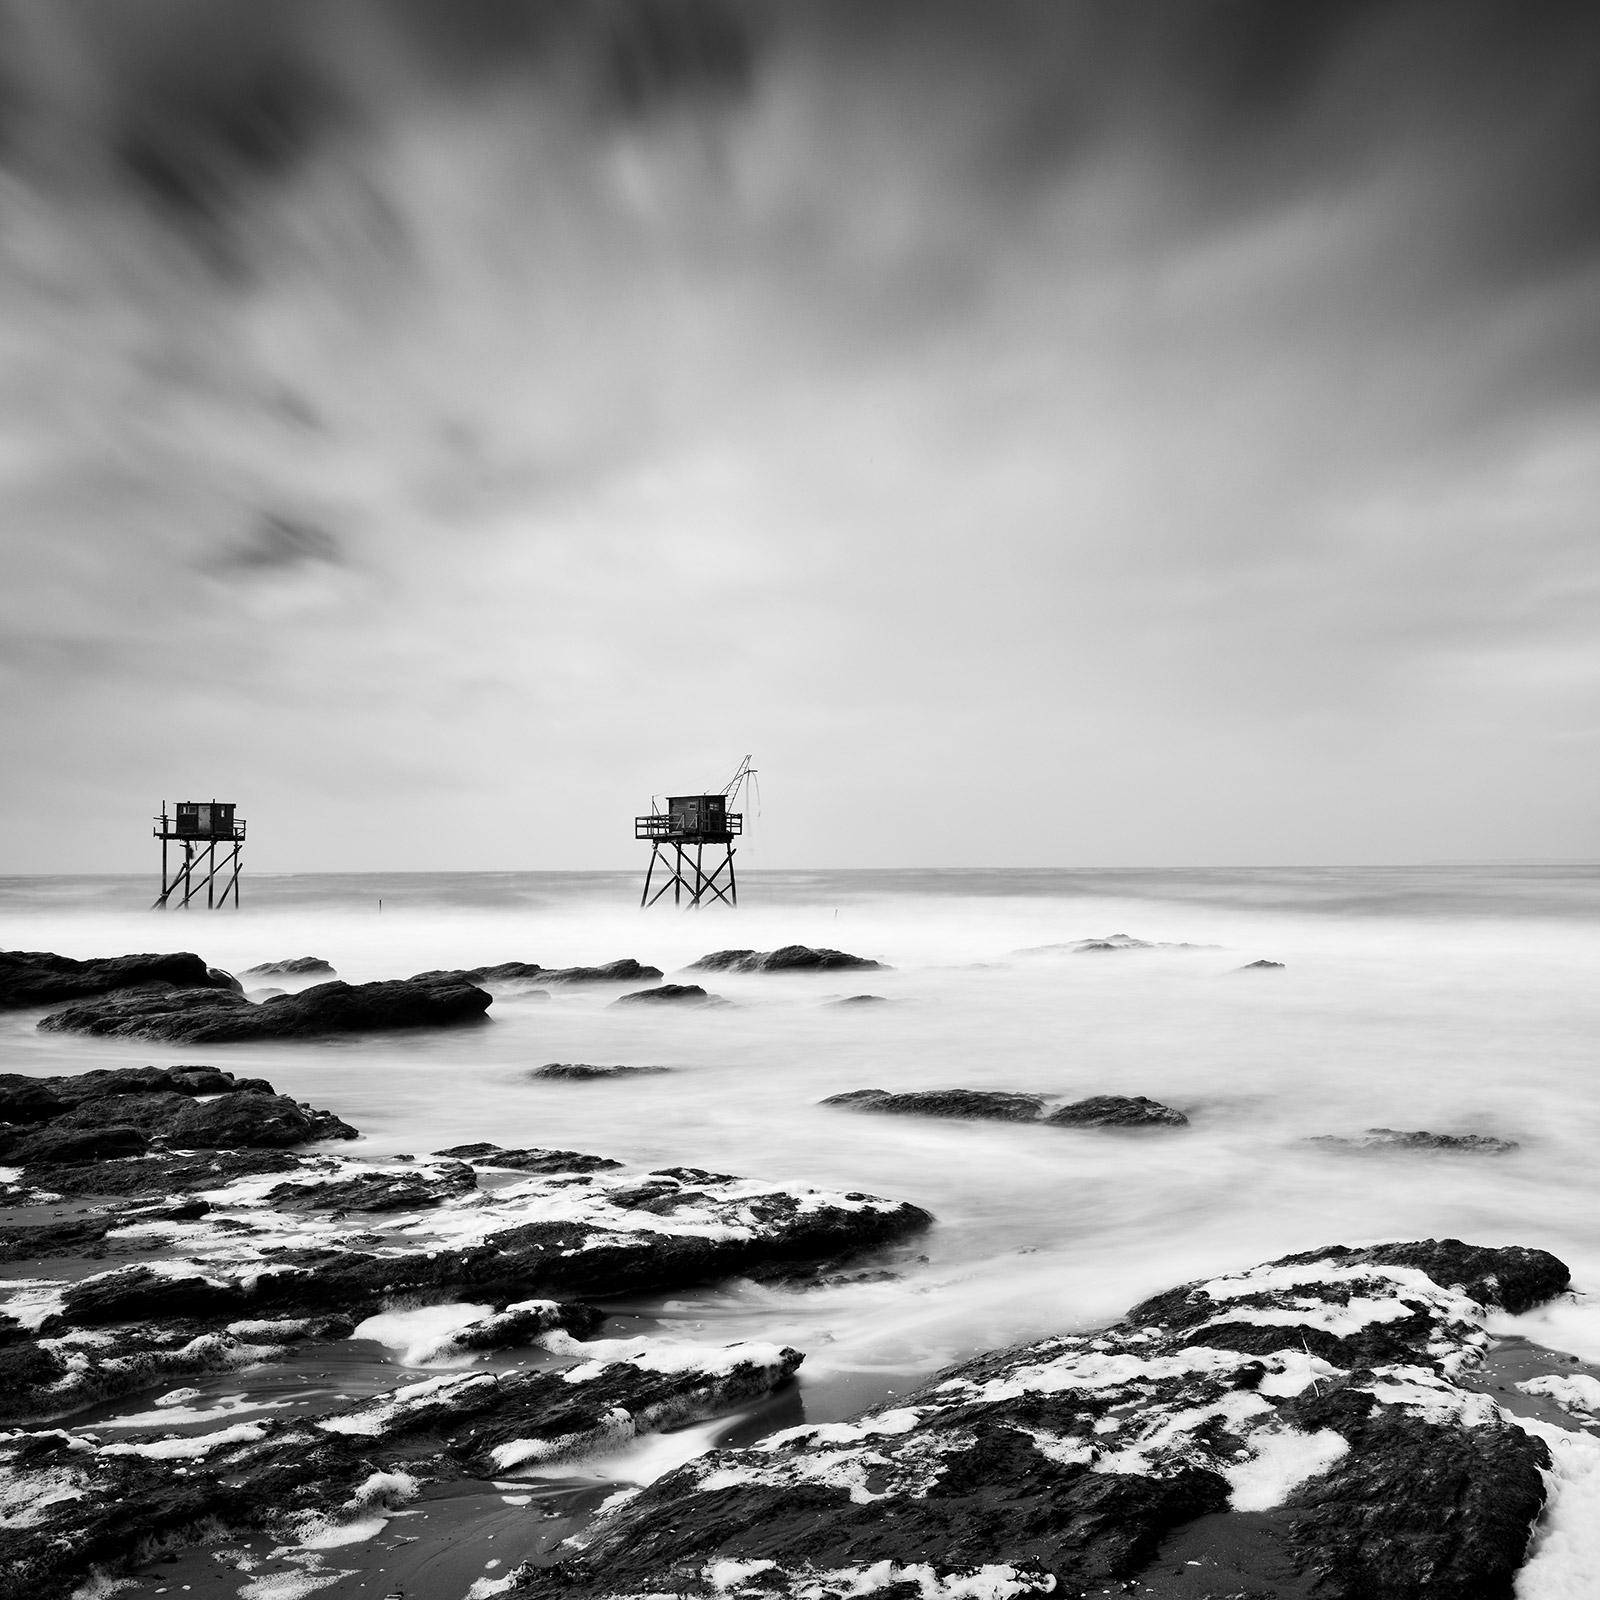 Gerald Berghammer Black and White Photograph - Fishing Hut on Stilts, coast of Atlantic Ocean, black and white waterscape